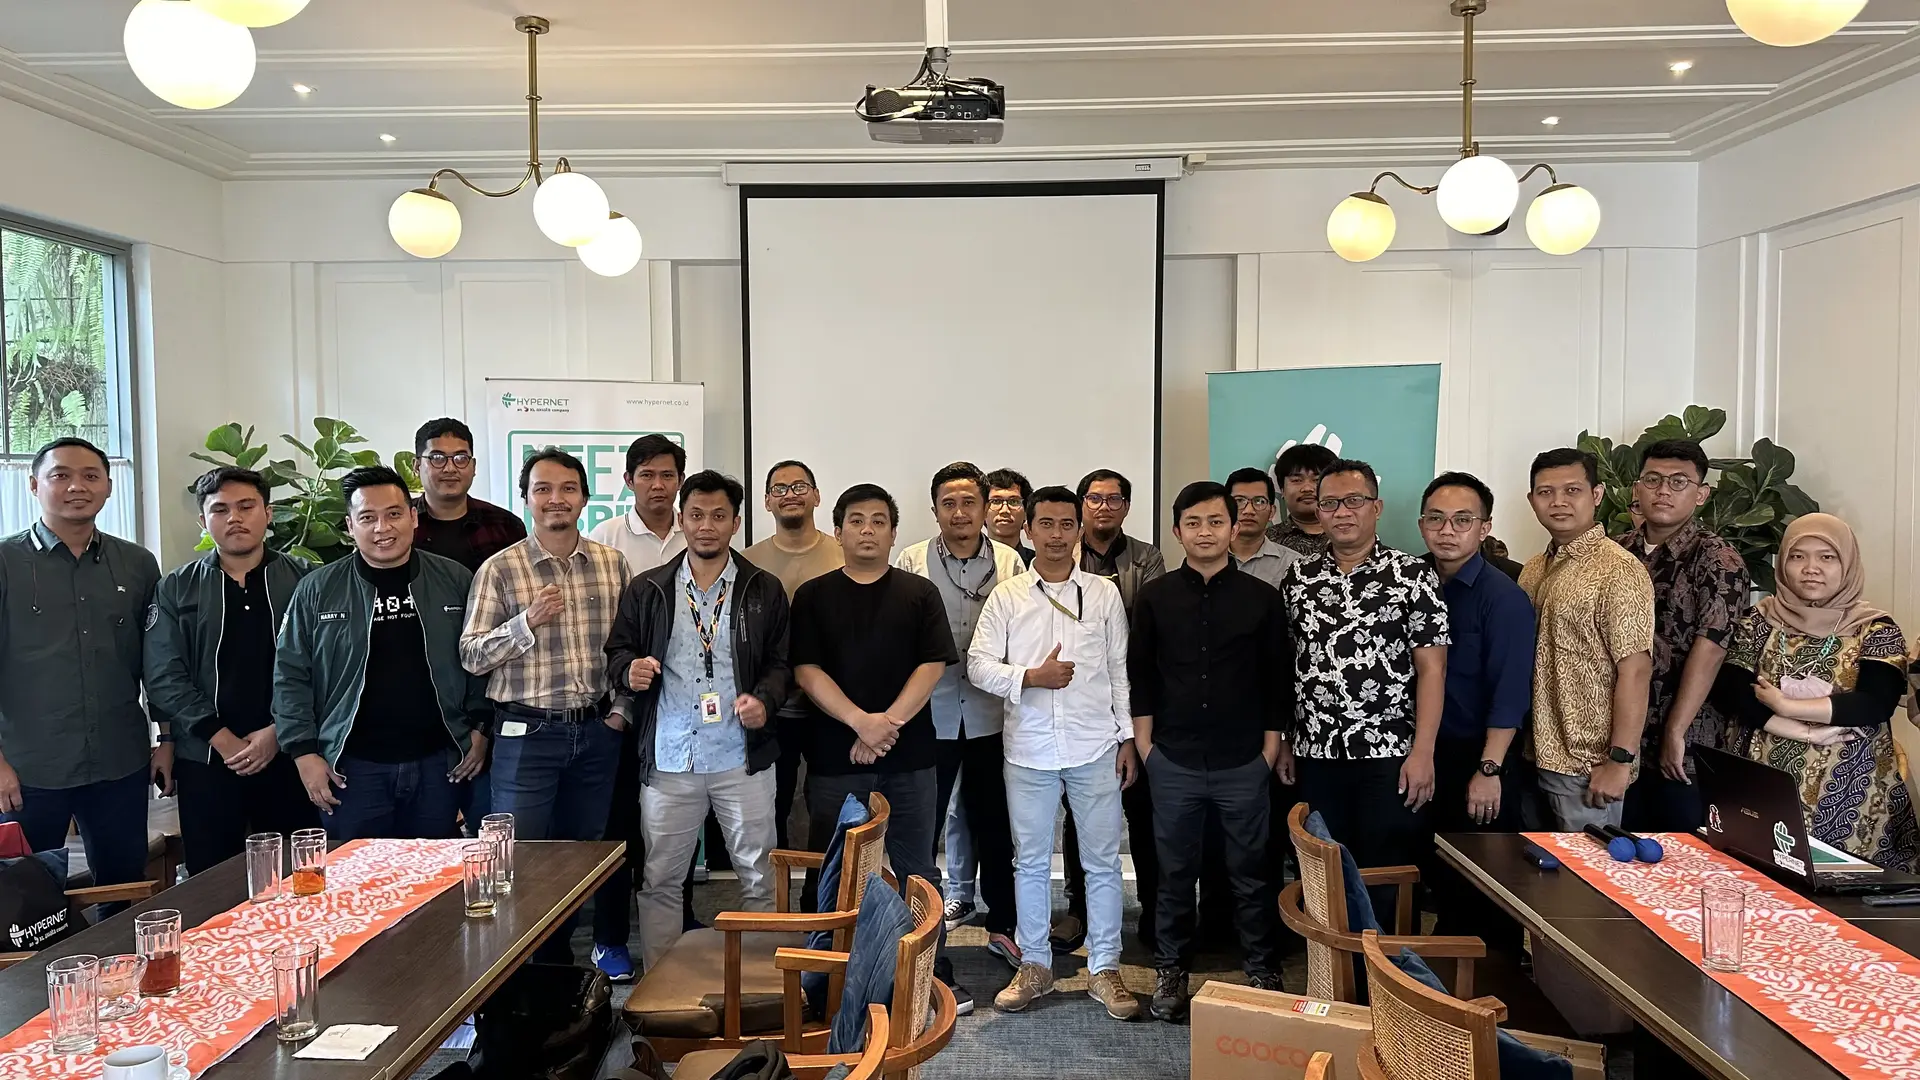 Hypernet Technologies and Fortinet Held Meet Eat Inspire Event: Discussing the Future of Retail Networks with Fortinet SD-WAN